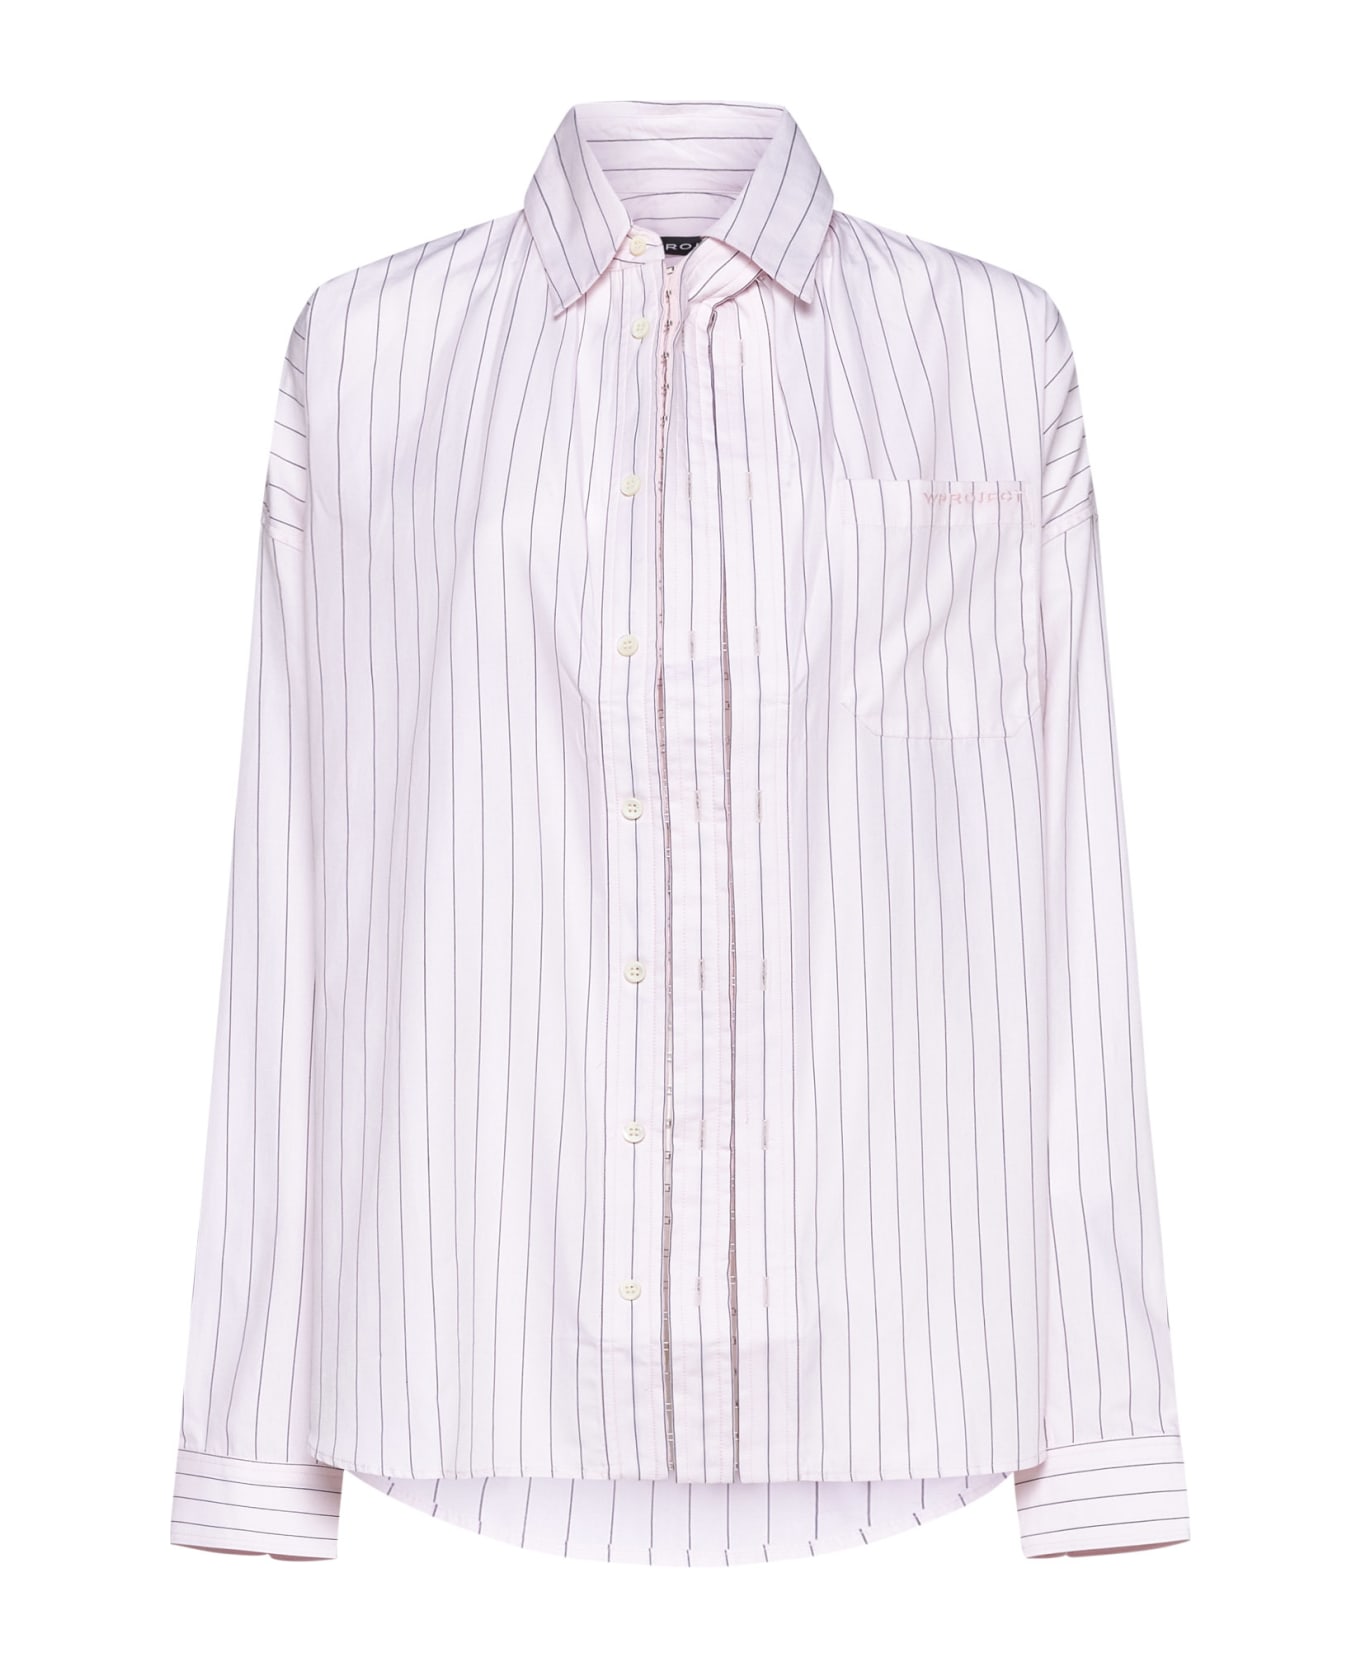 Y/Project Shirt - Pink stripe